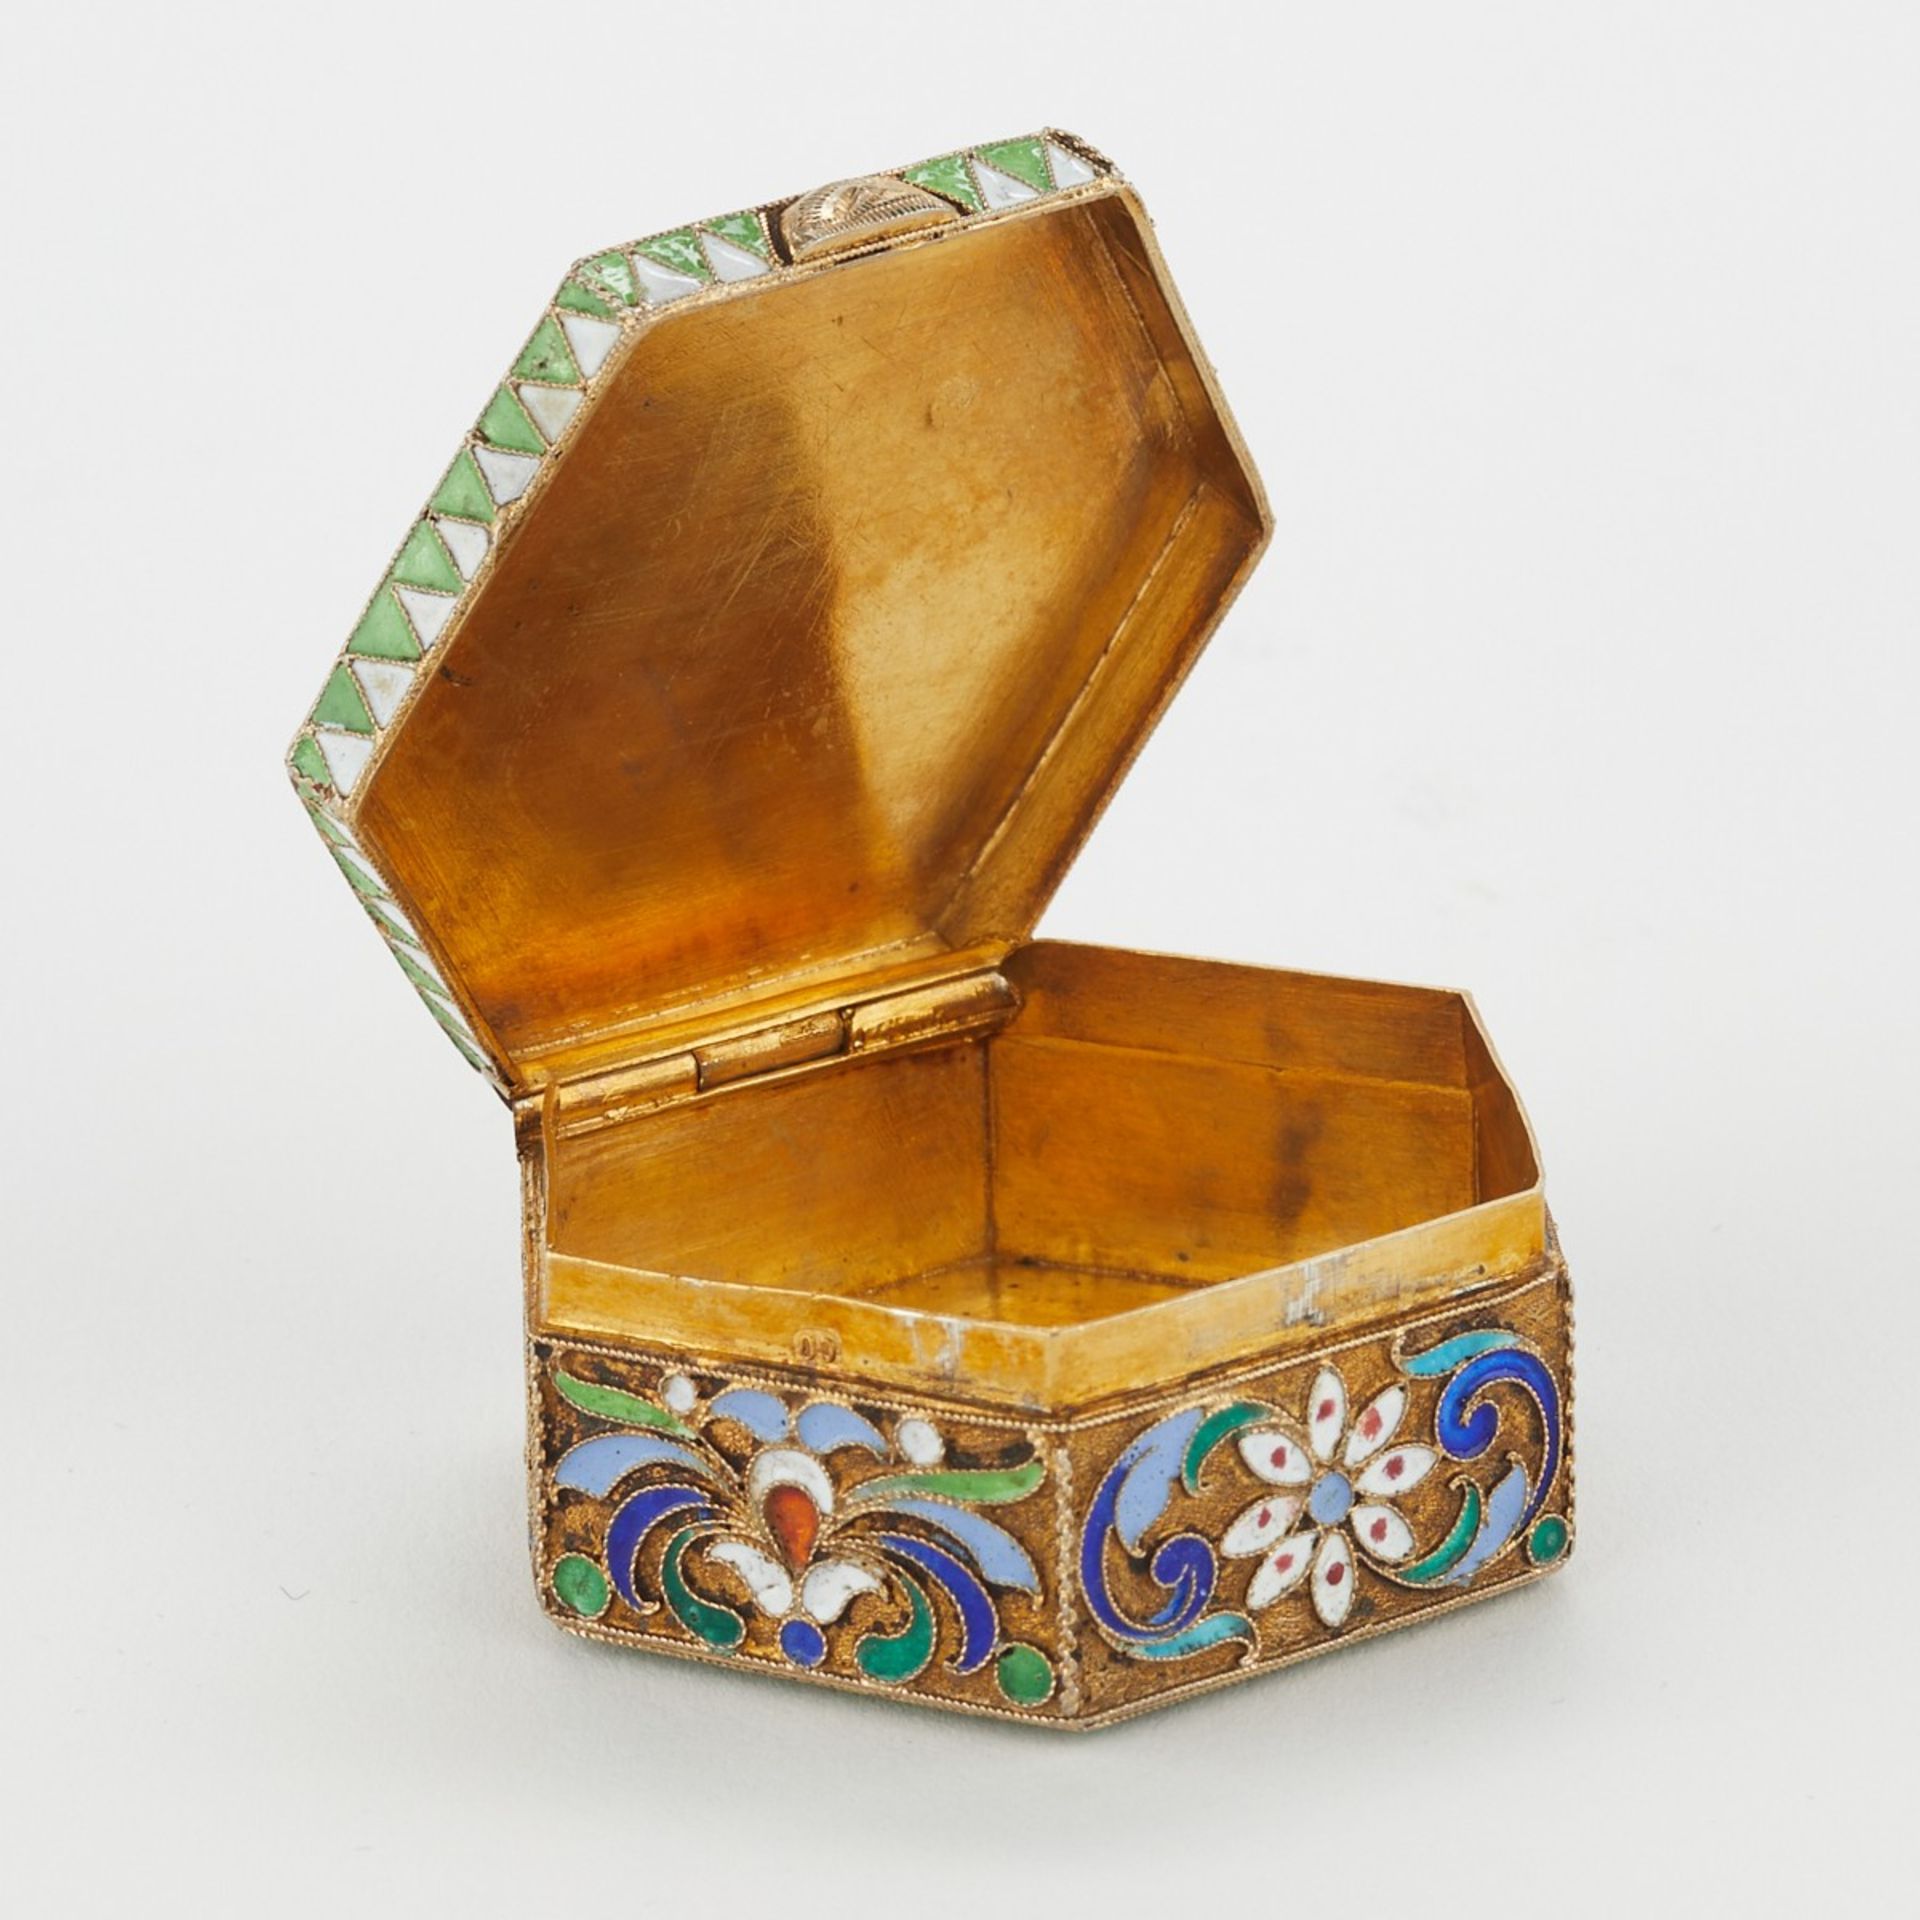 Russian Enameled Silver Spoon & Box - Image 9 of 14